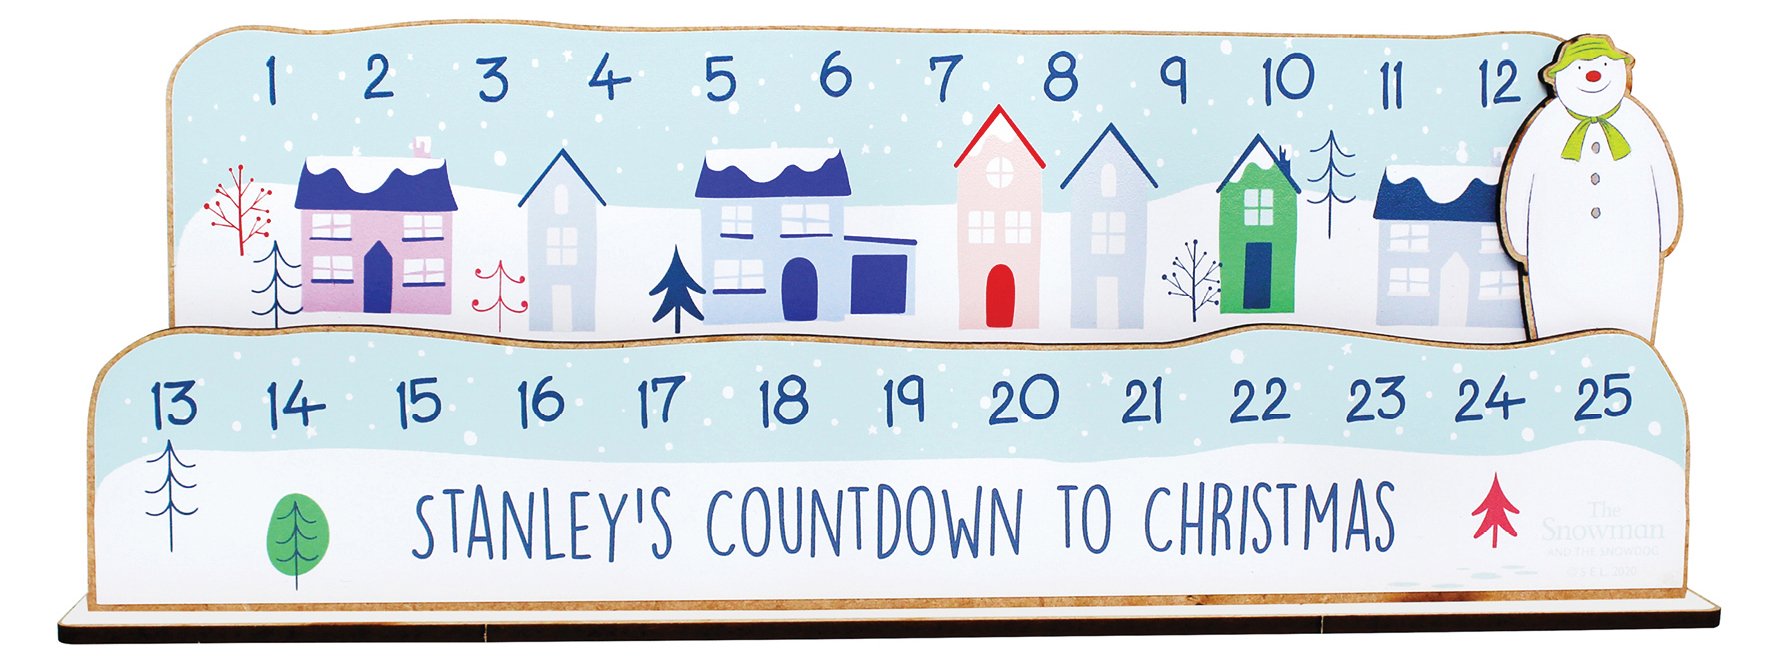 personalised-make-your-own-snowman-christmas-advent-countdown-calendar